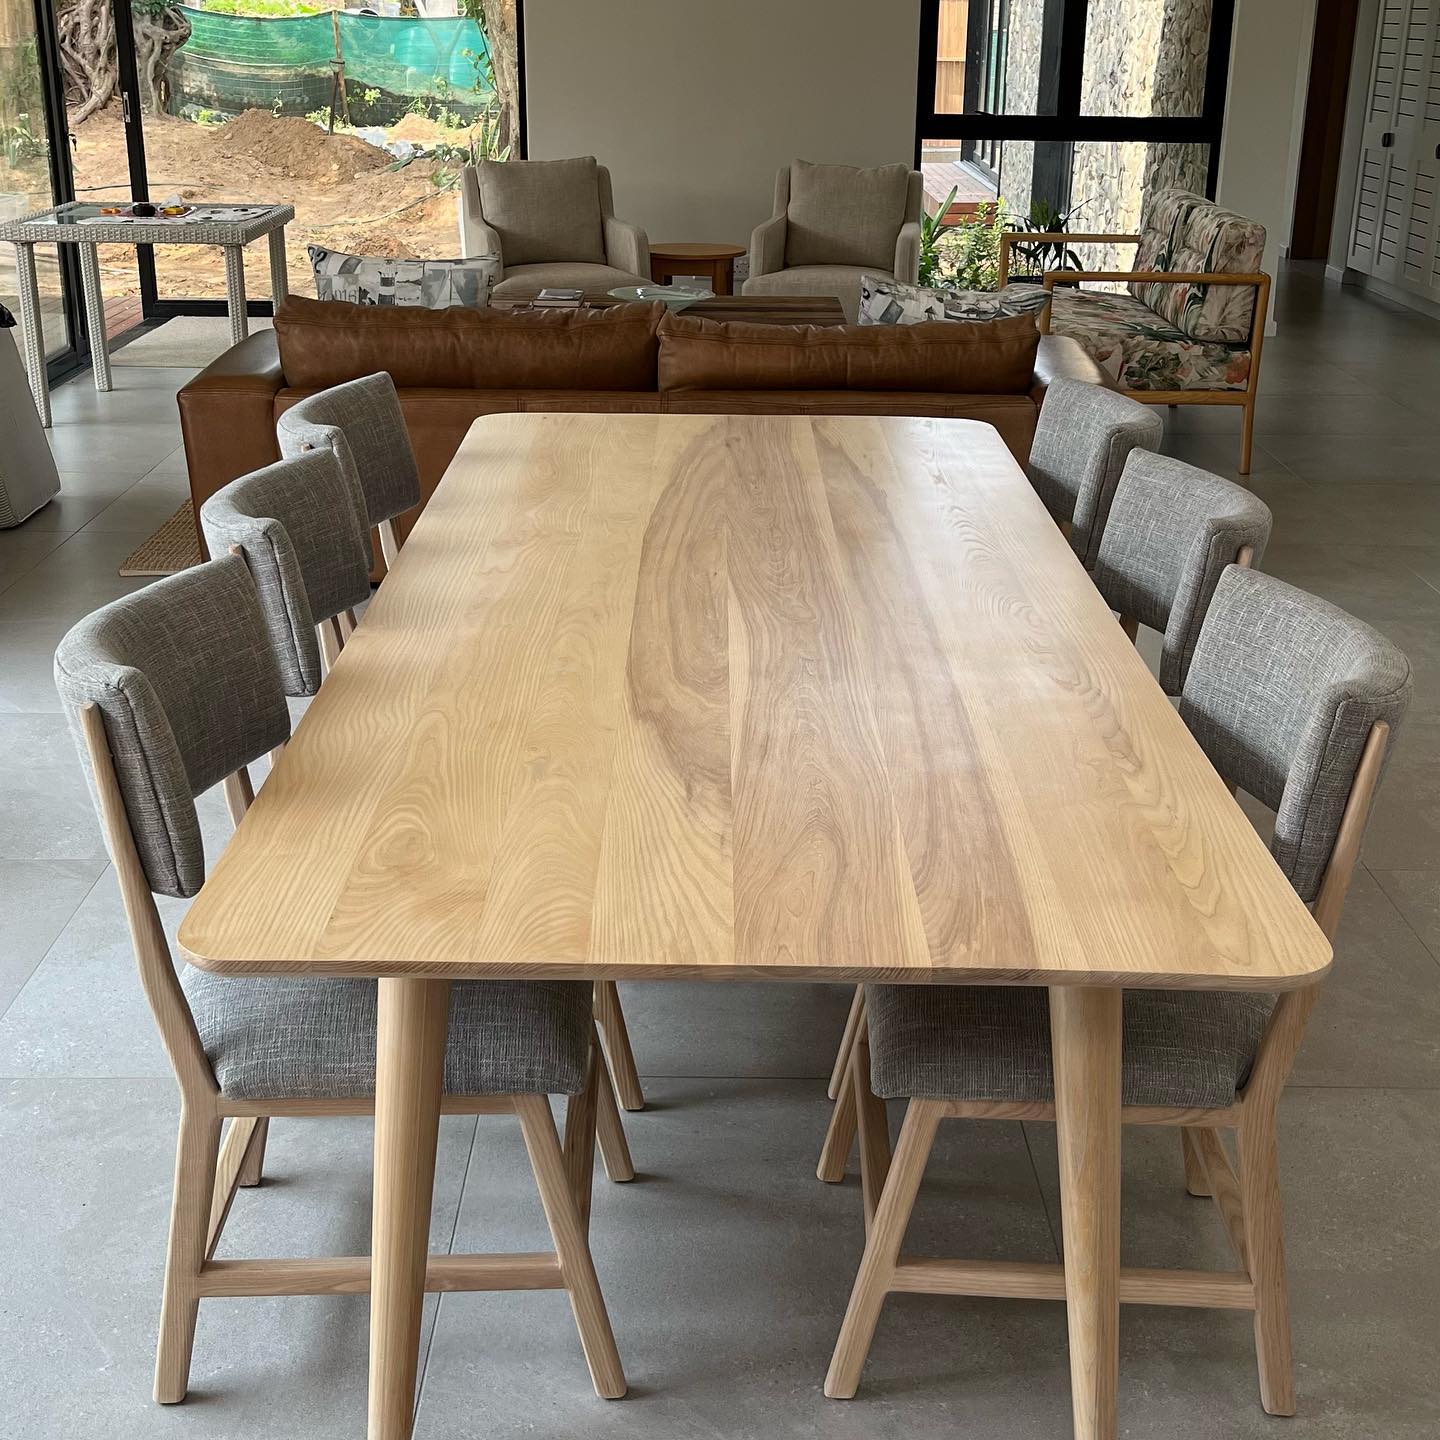 Dining table + chairs (2)